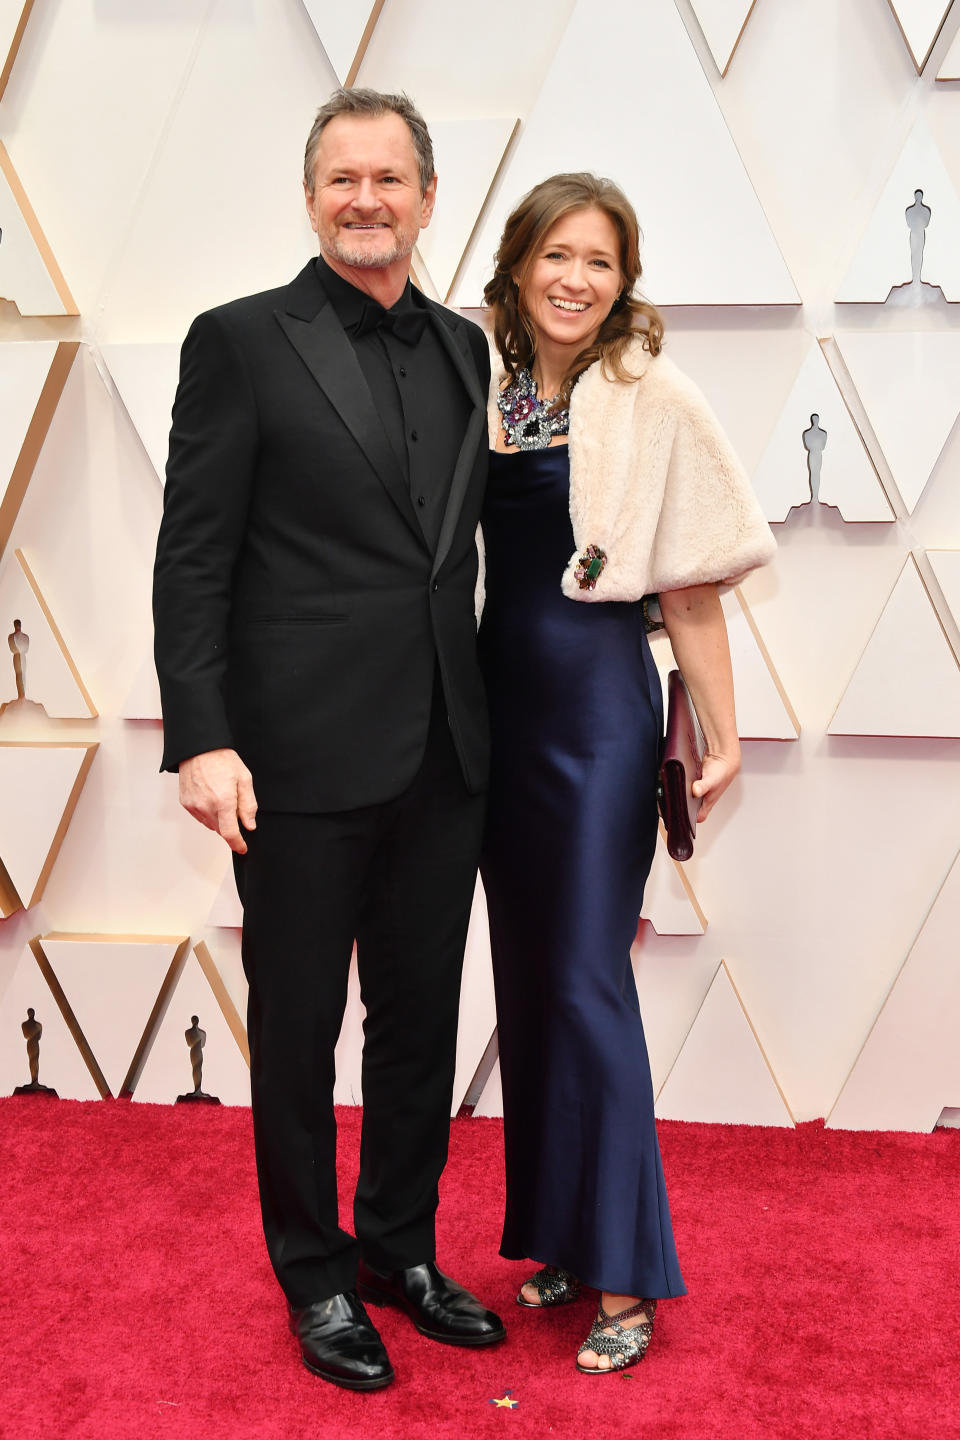 HOLLYWOOD, CALIFORNIA - FEBRUARY 09: Sound artist Tod A. Maitland (L) and a guest attend the 92nd Annual Academy Awards at Hollywood and Highland on February 09, 2020 in Hollywood, California. (Photo by Amy Sussman/Getty Images)